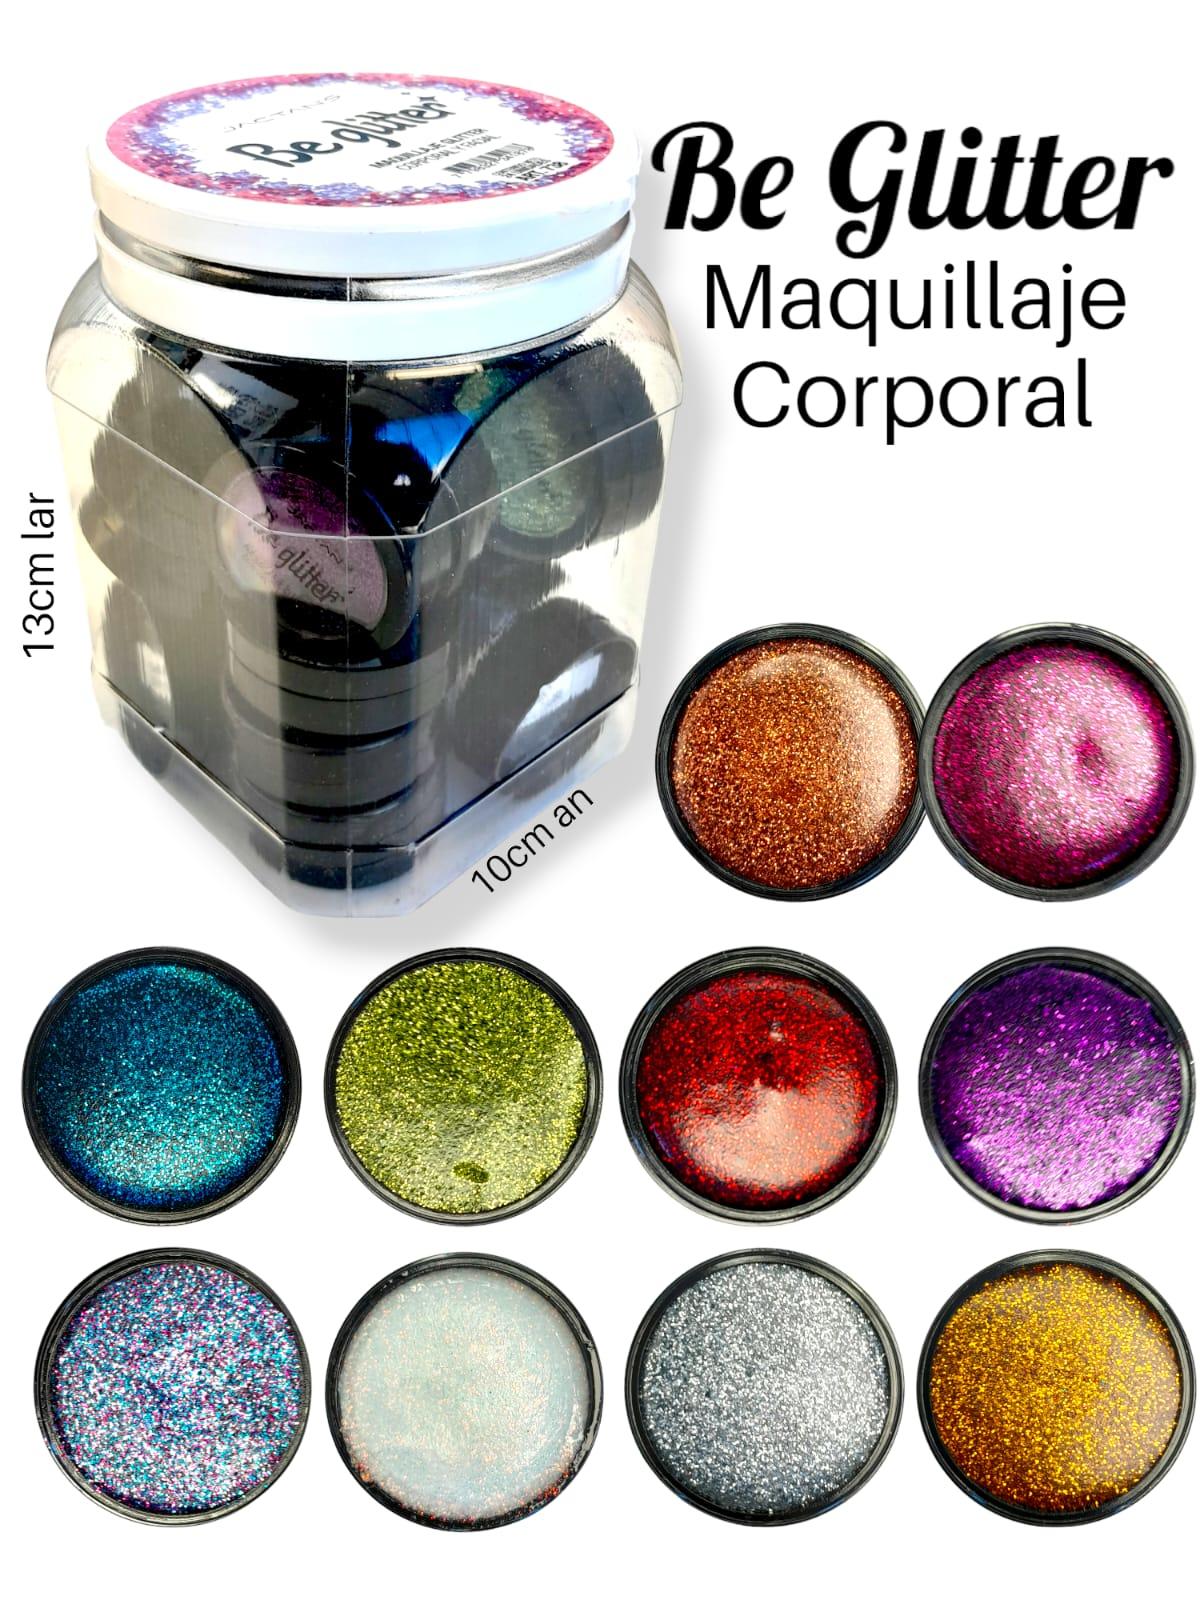 Be Glitter Maquillaje Corporal y facial